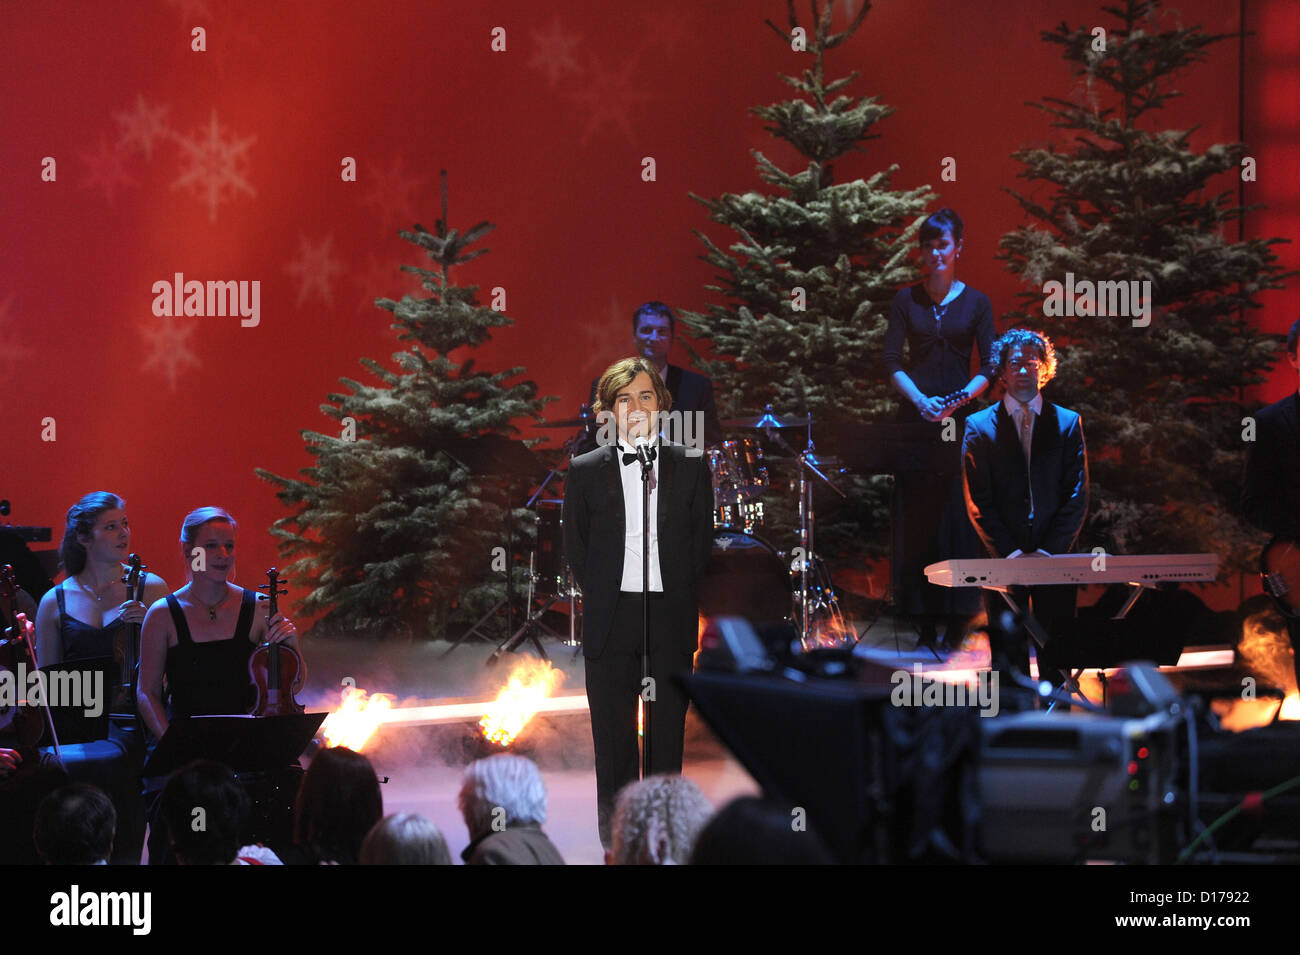 Swiss tenor Erkan Aki performs at the ZDF telethon 'Wonderful Christmas Songs' ('Die schoensten Weihnachts-Hits') to help the cause of relief agencies 'Misereor' and 'Brot fuer die Welt' in Munich, Germany, 06 December 2012. Both agencies support aid in Africa, Asia and Latin America. Photo: Ursula Dueren Stock Photo